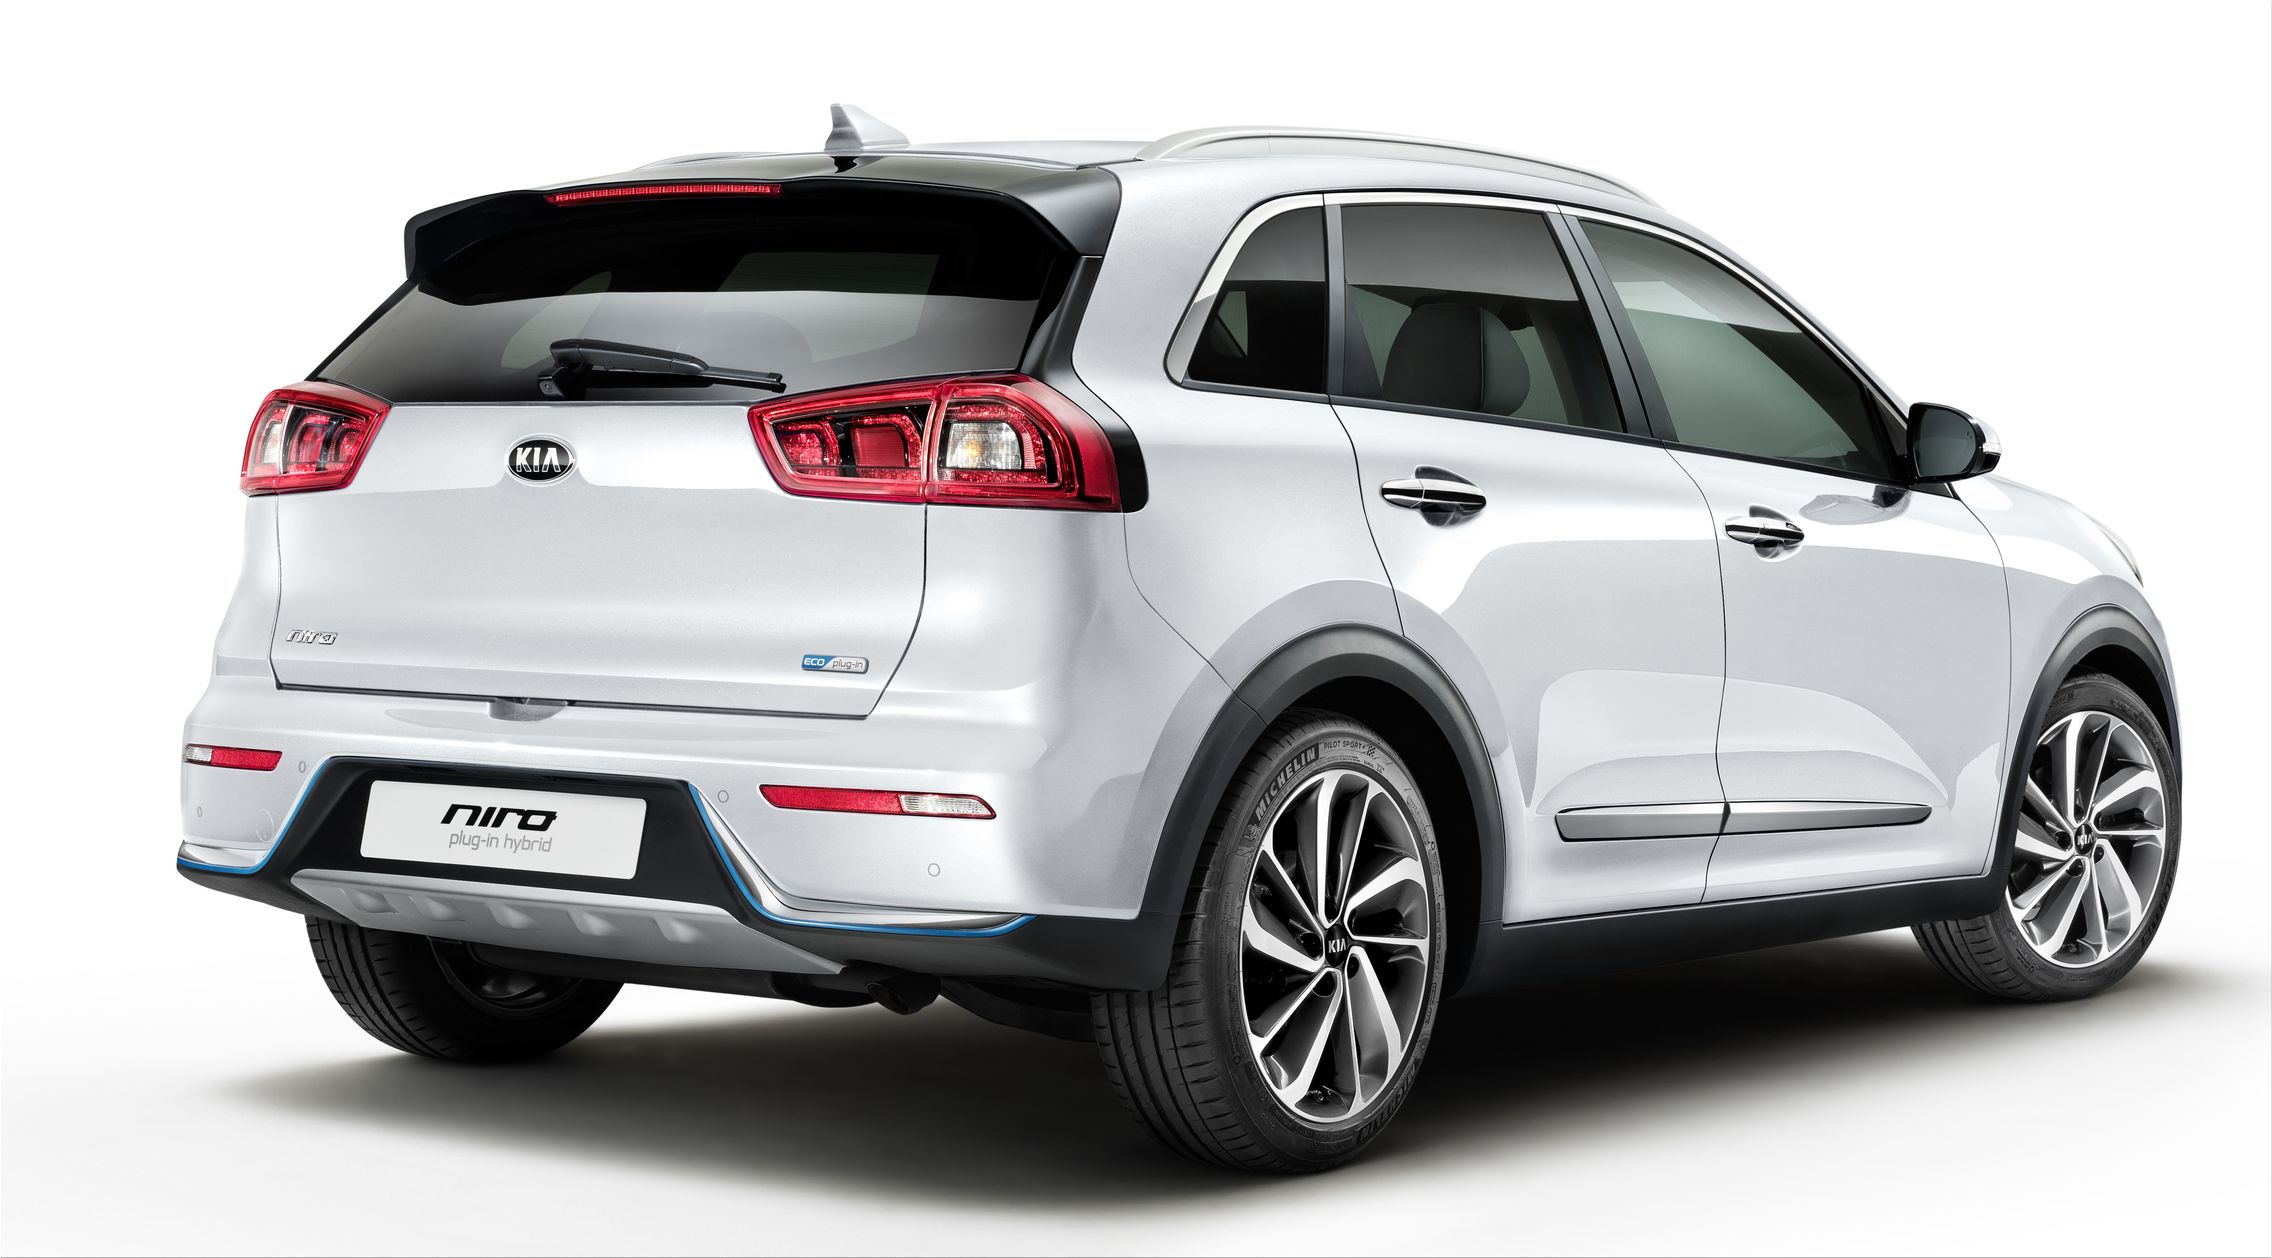 New Versions of Kia Niro Hybrid and Plugin Hybrid can be ordered now